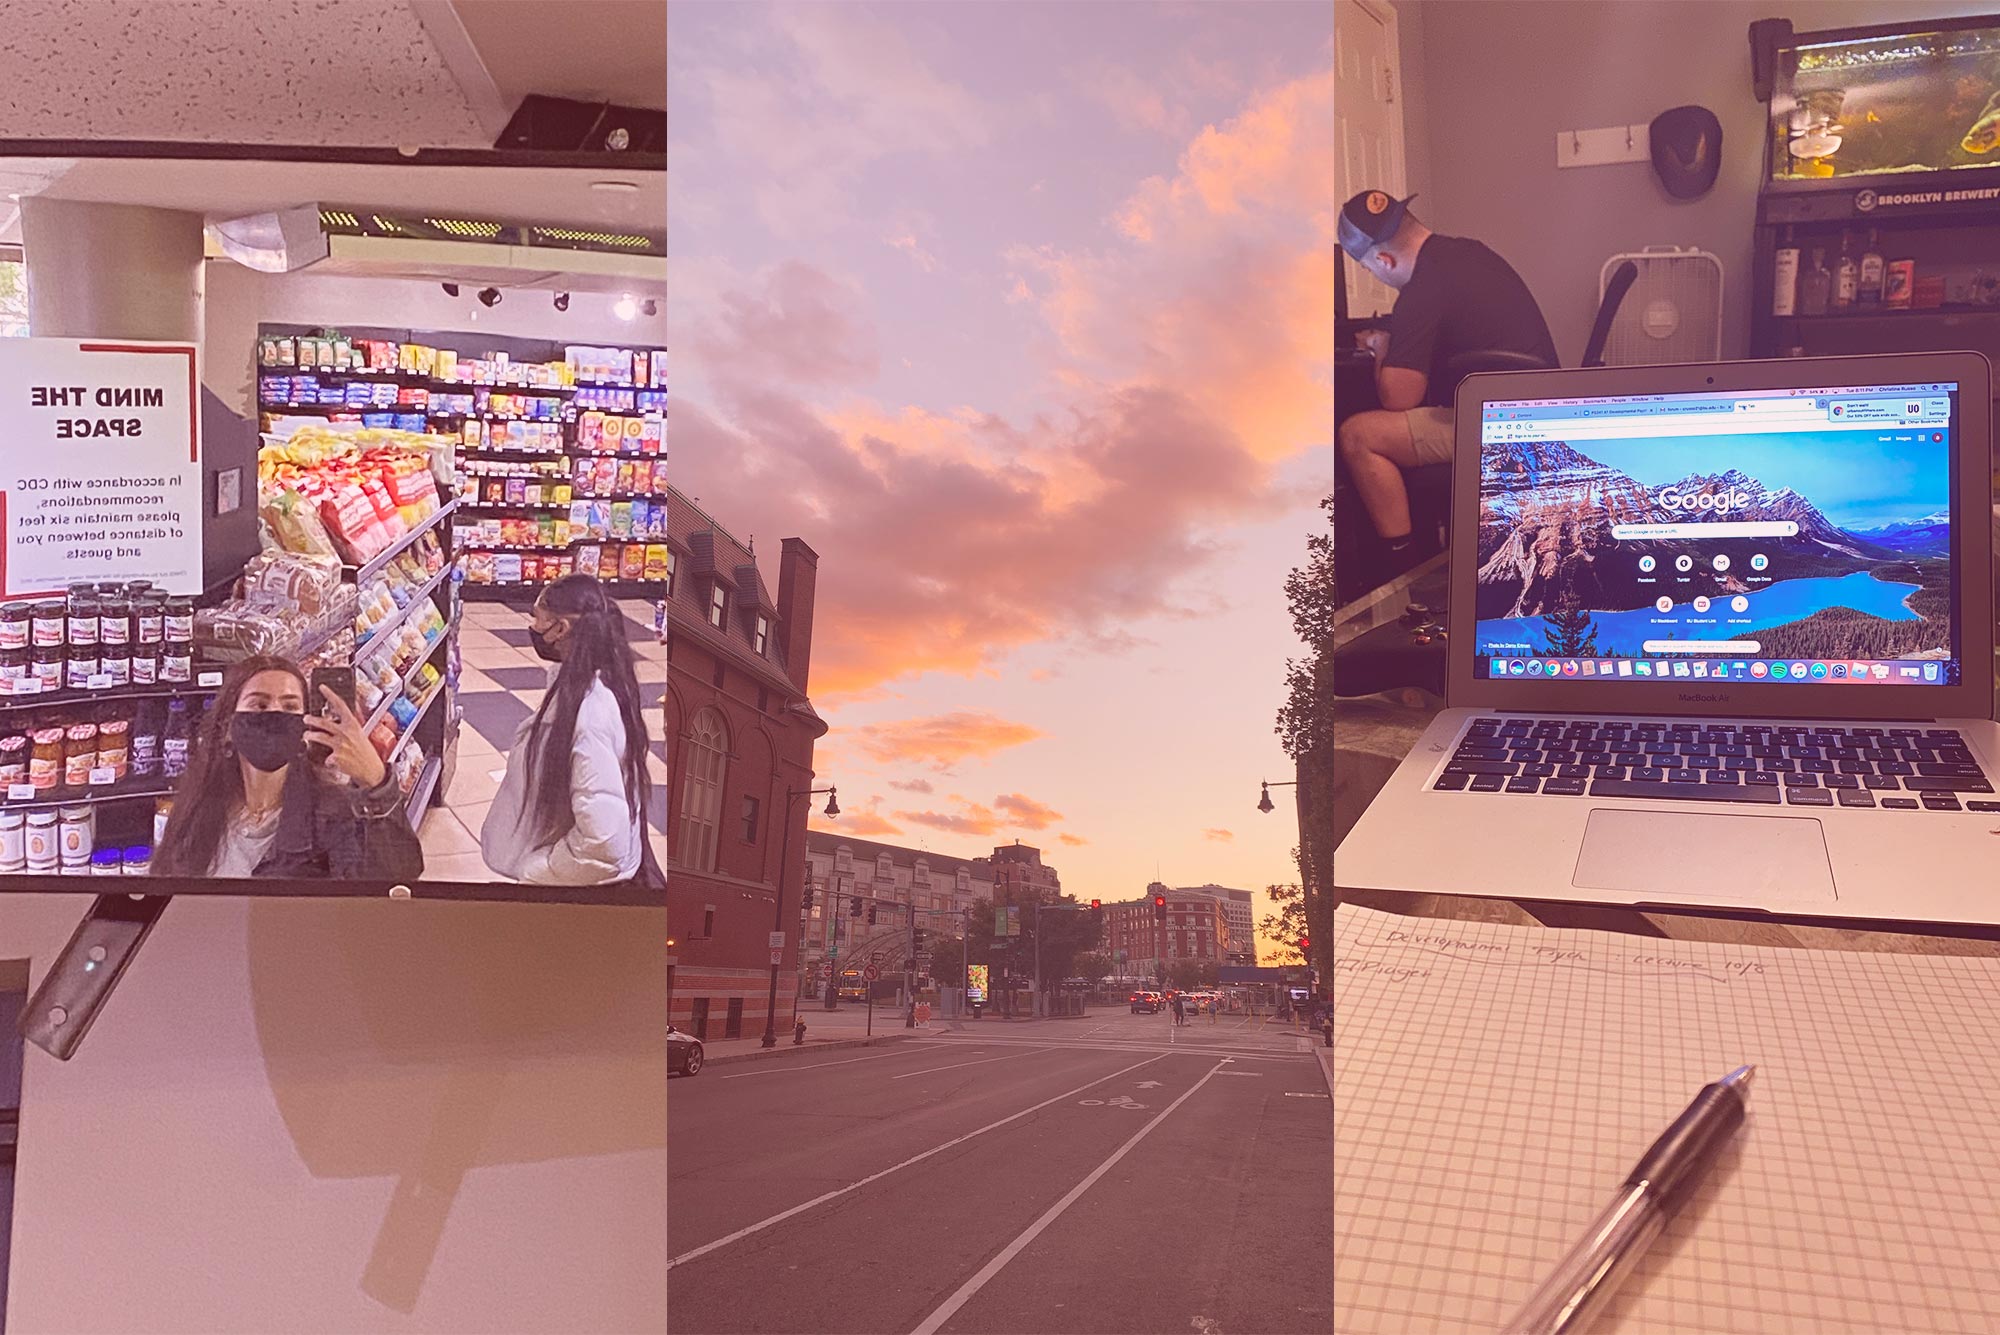 Composite image of three vertical photos. The first photo, taken by Skyler Gauuan, shows to women in the corner mirror of a small grocery store with a social distancing sign. The next photo from Bridgette Lang depicts pink fluffy clouds over Kenmore Square. The last photo from Christine Russo shows a piece of graph paper and pen sitting in front of computer with google open with someone in the background working on their laptop. Overlay is bright pink.